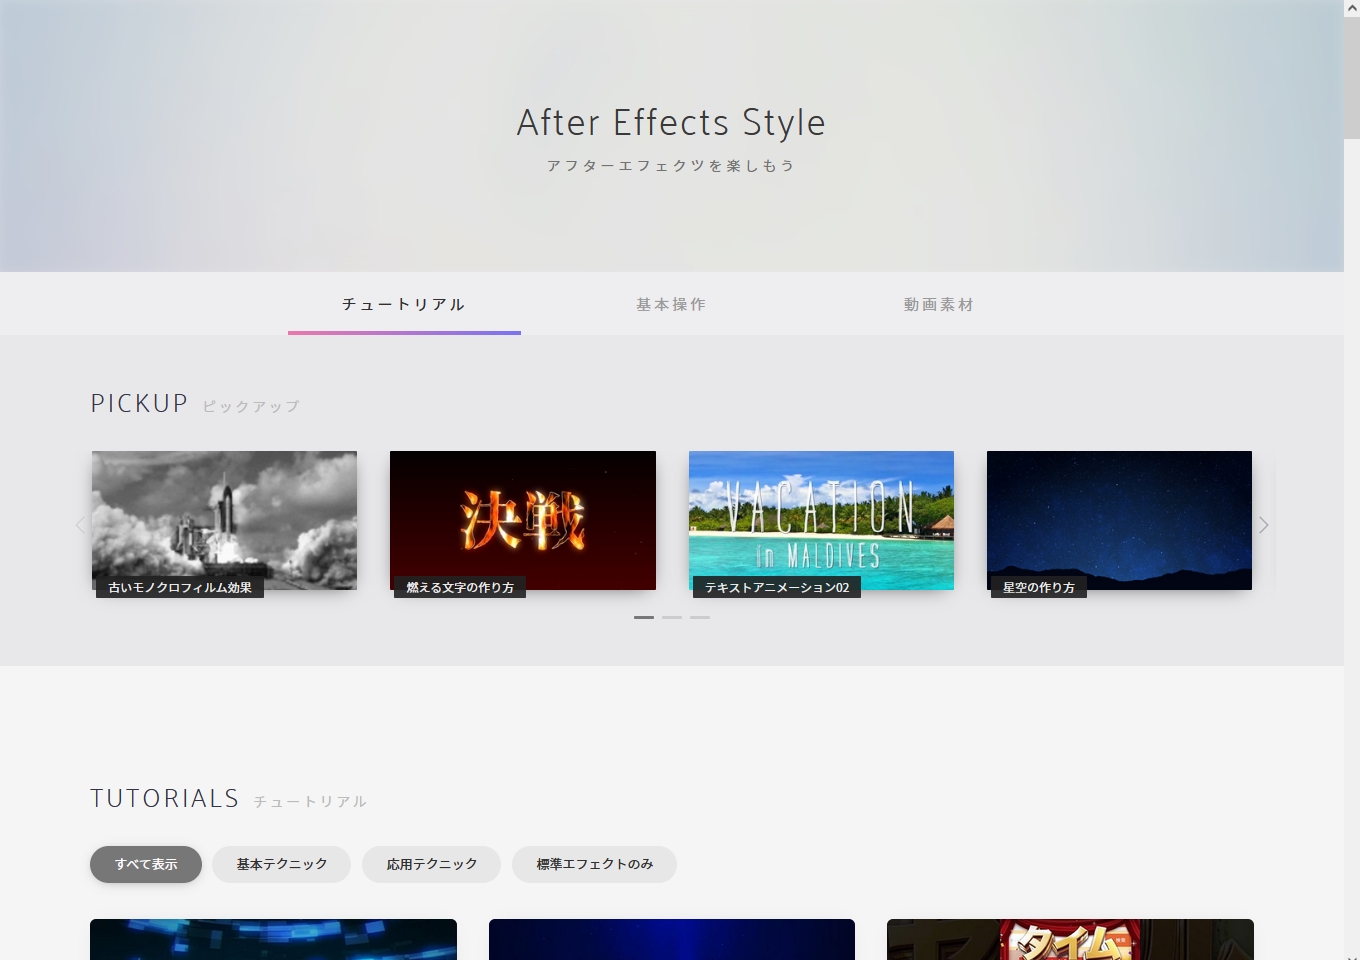 After Effects Style（アフターエフェクツスタイル）